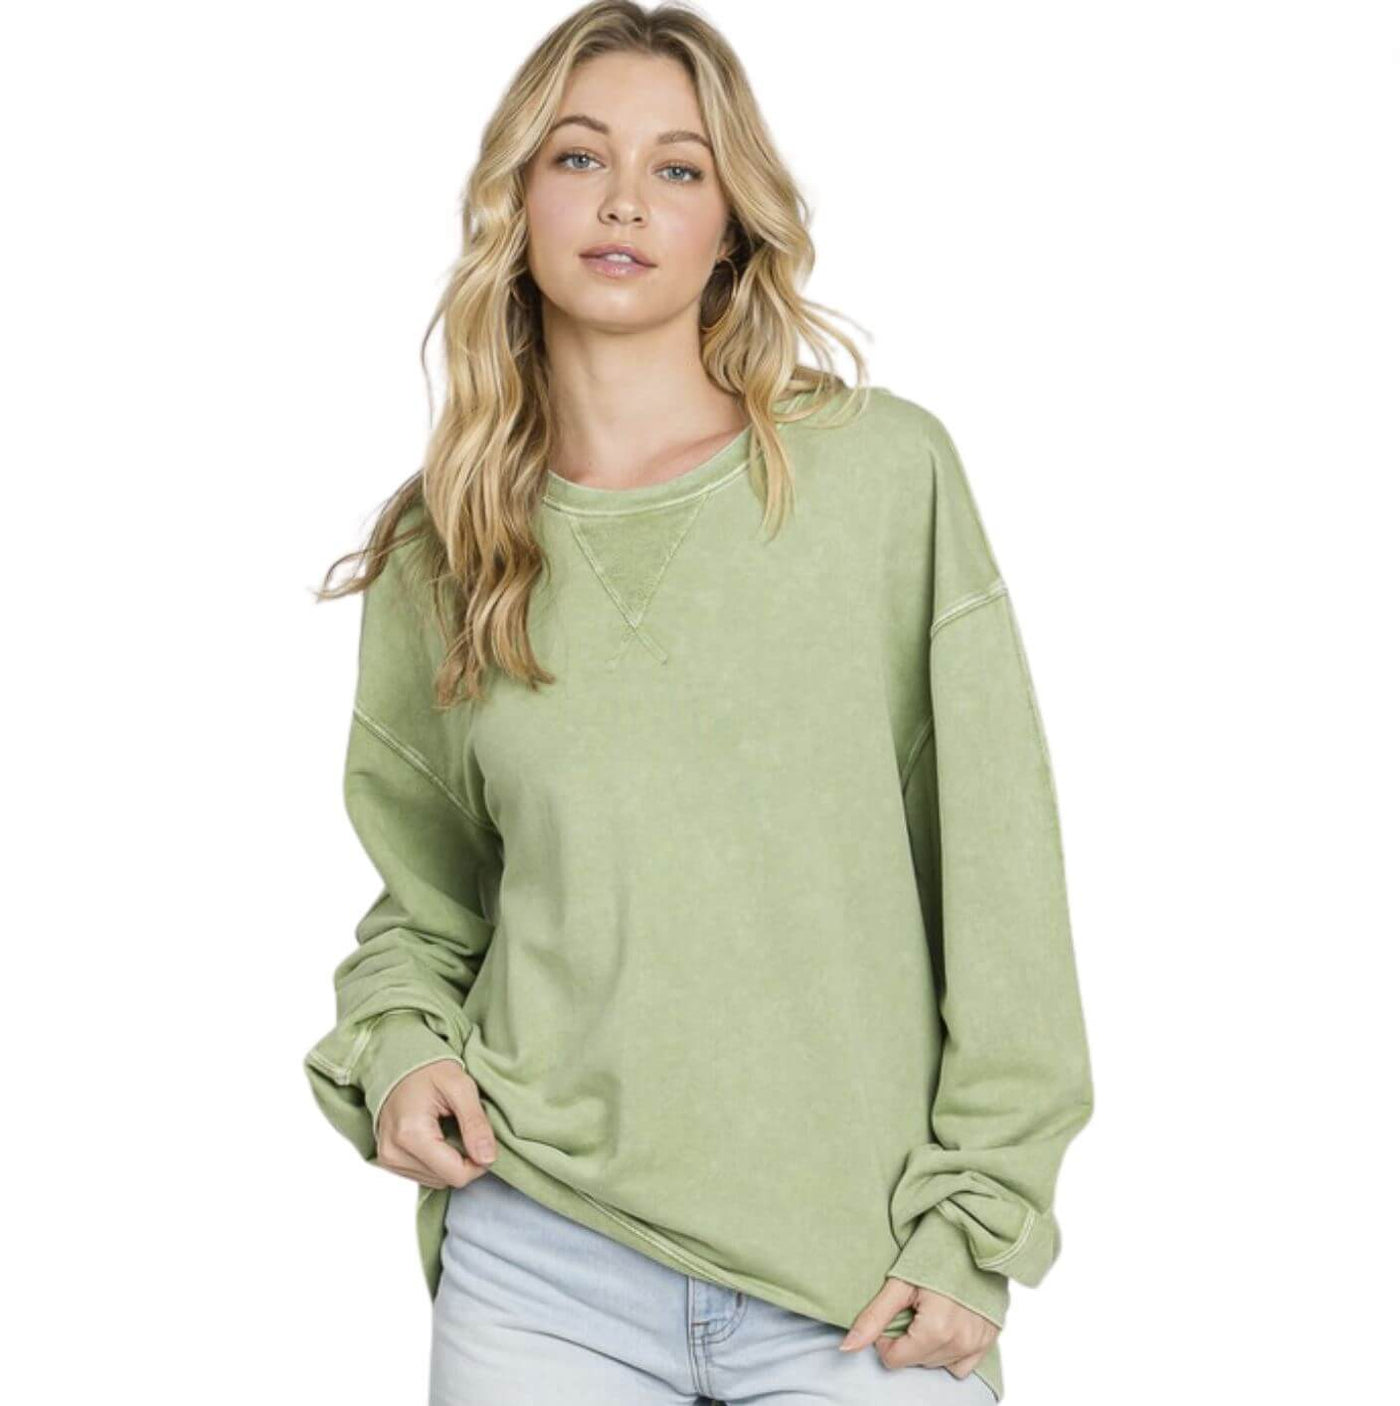 Made in USA Misses Oversized Cotton Mineral Washed Sweatshirt in Antique Sage | Made in USA with USA Cotton | Classy Cozy Cool Women's Made in America Boutique